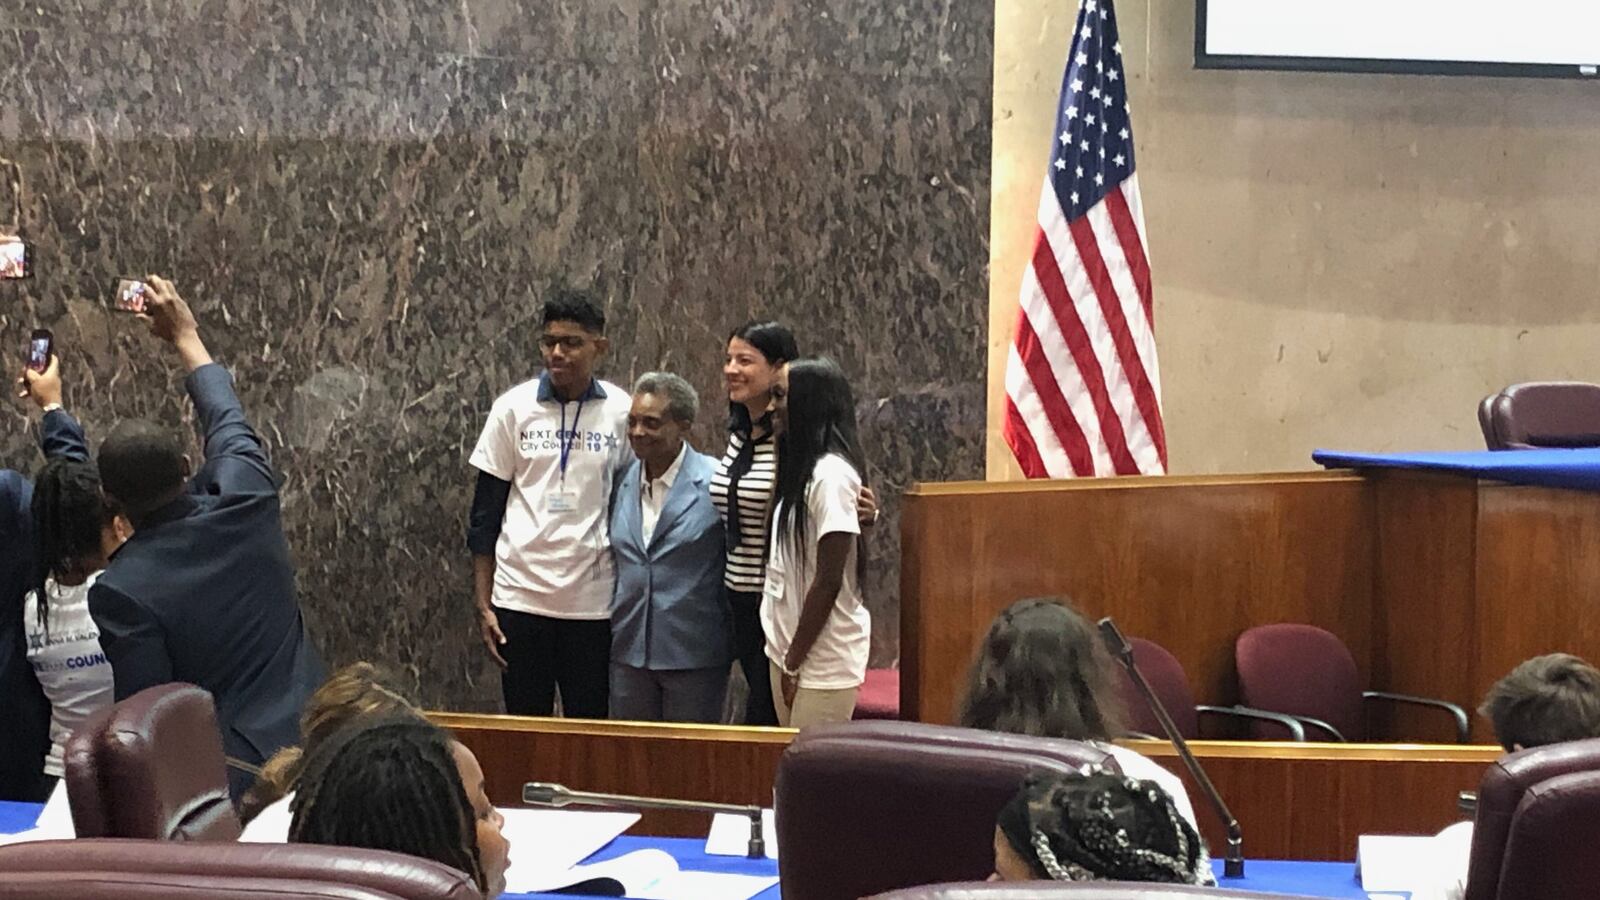 Lori Lightfoot addressed high school students and took photos with them in her first appearance at the Chicago City Council on May 23, 2019.